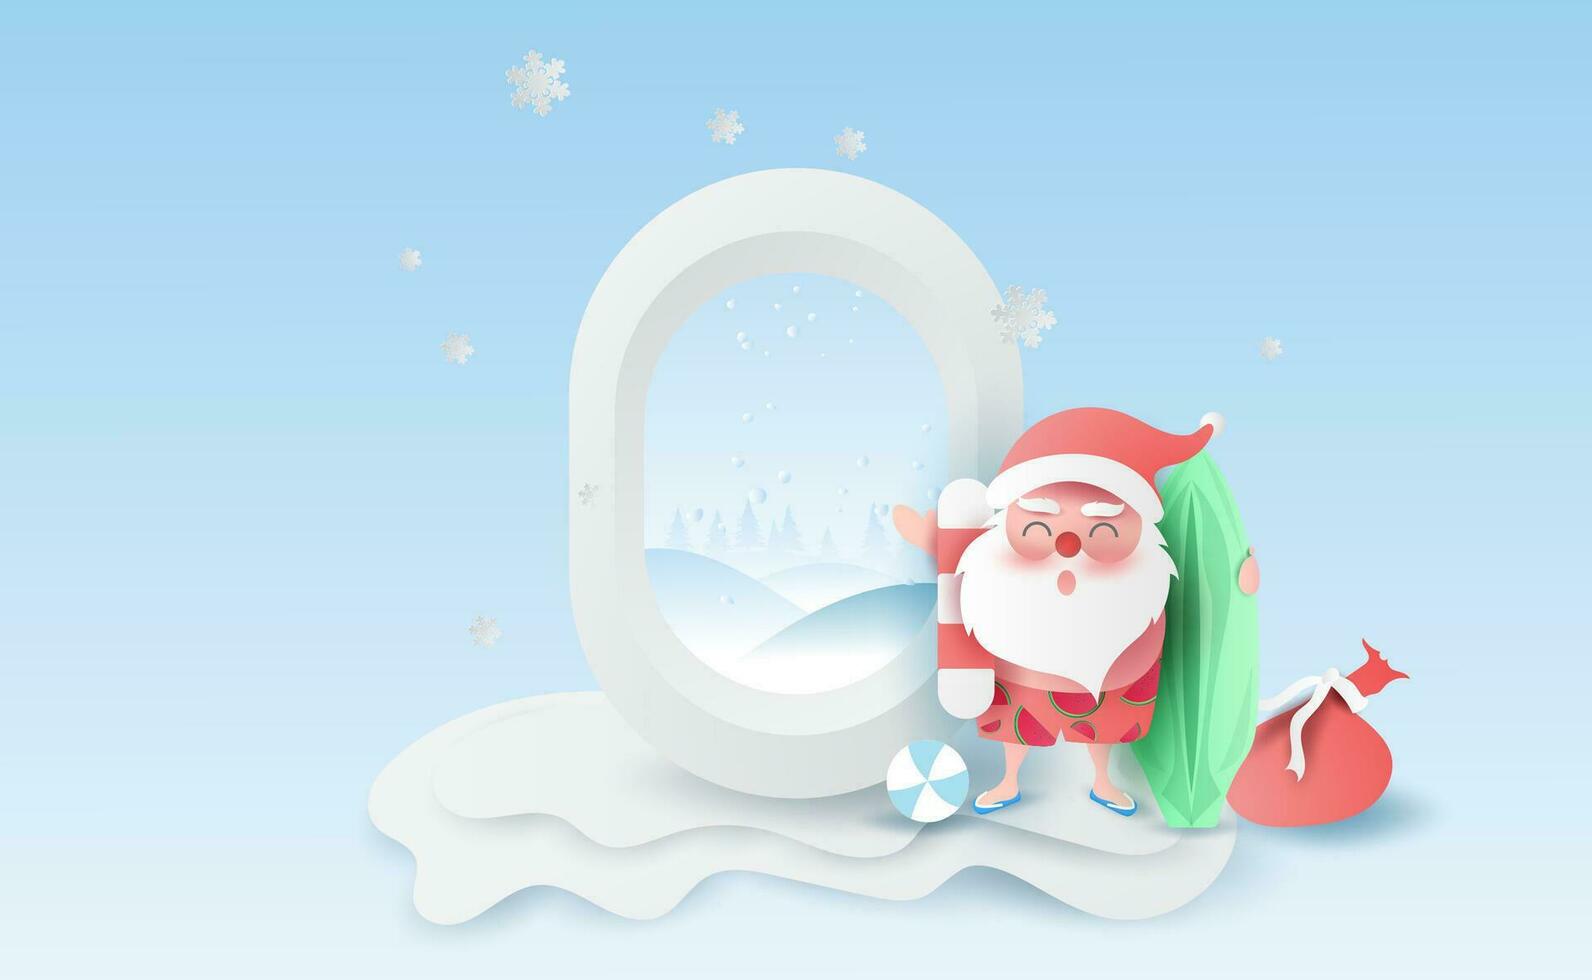 Santa Claus wearing beach suit of Surf Boards,swim ring and ball in air view window plane.Forest on sky. Merry Christmas and Happy New Year background.snow concept with paper cut and craft.vector vector